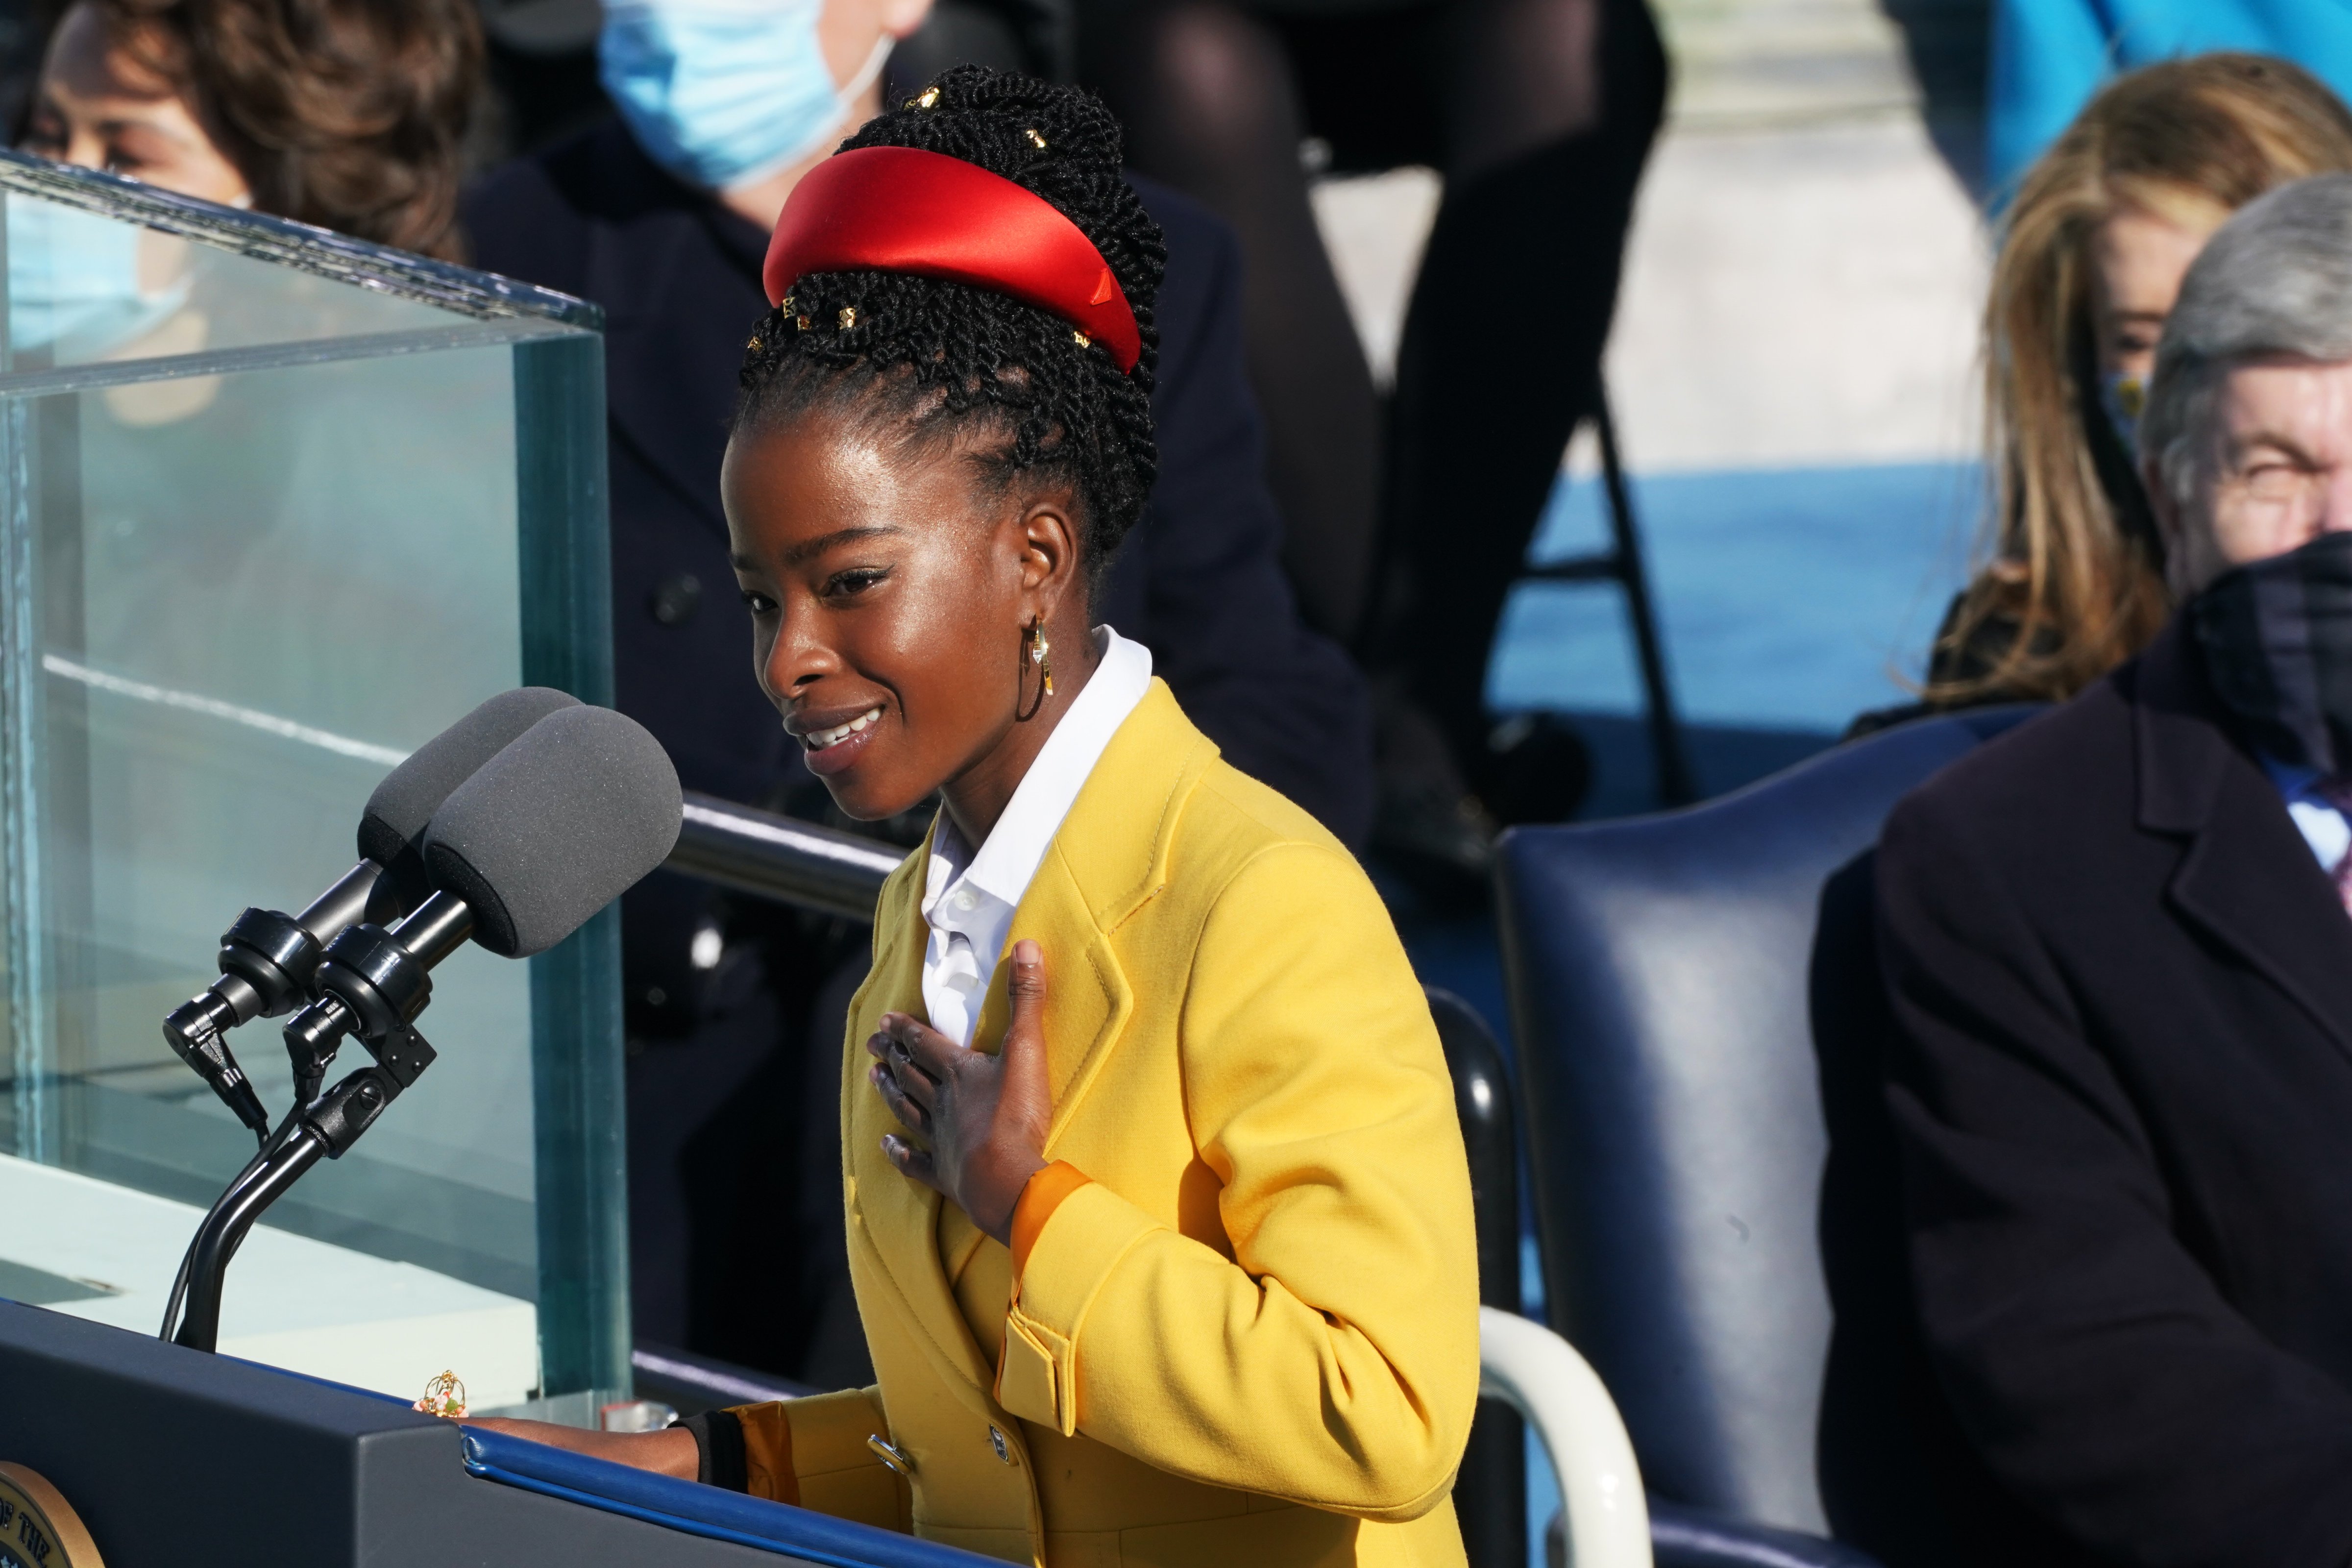 Amanda Gorman, delivers a poem during the inauguration of President Joe Biden in Washington, D.C. on Jan 20. (Erin Schaf—Pool/Getty Images National Youth Poet Laureate,)